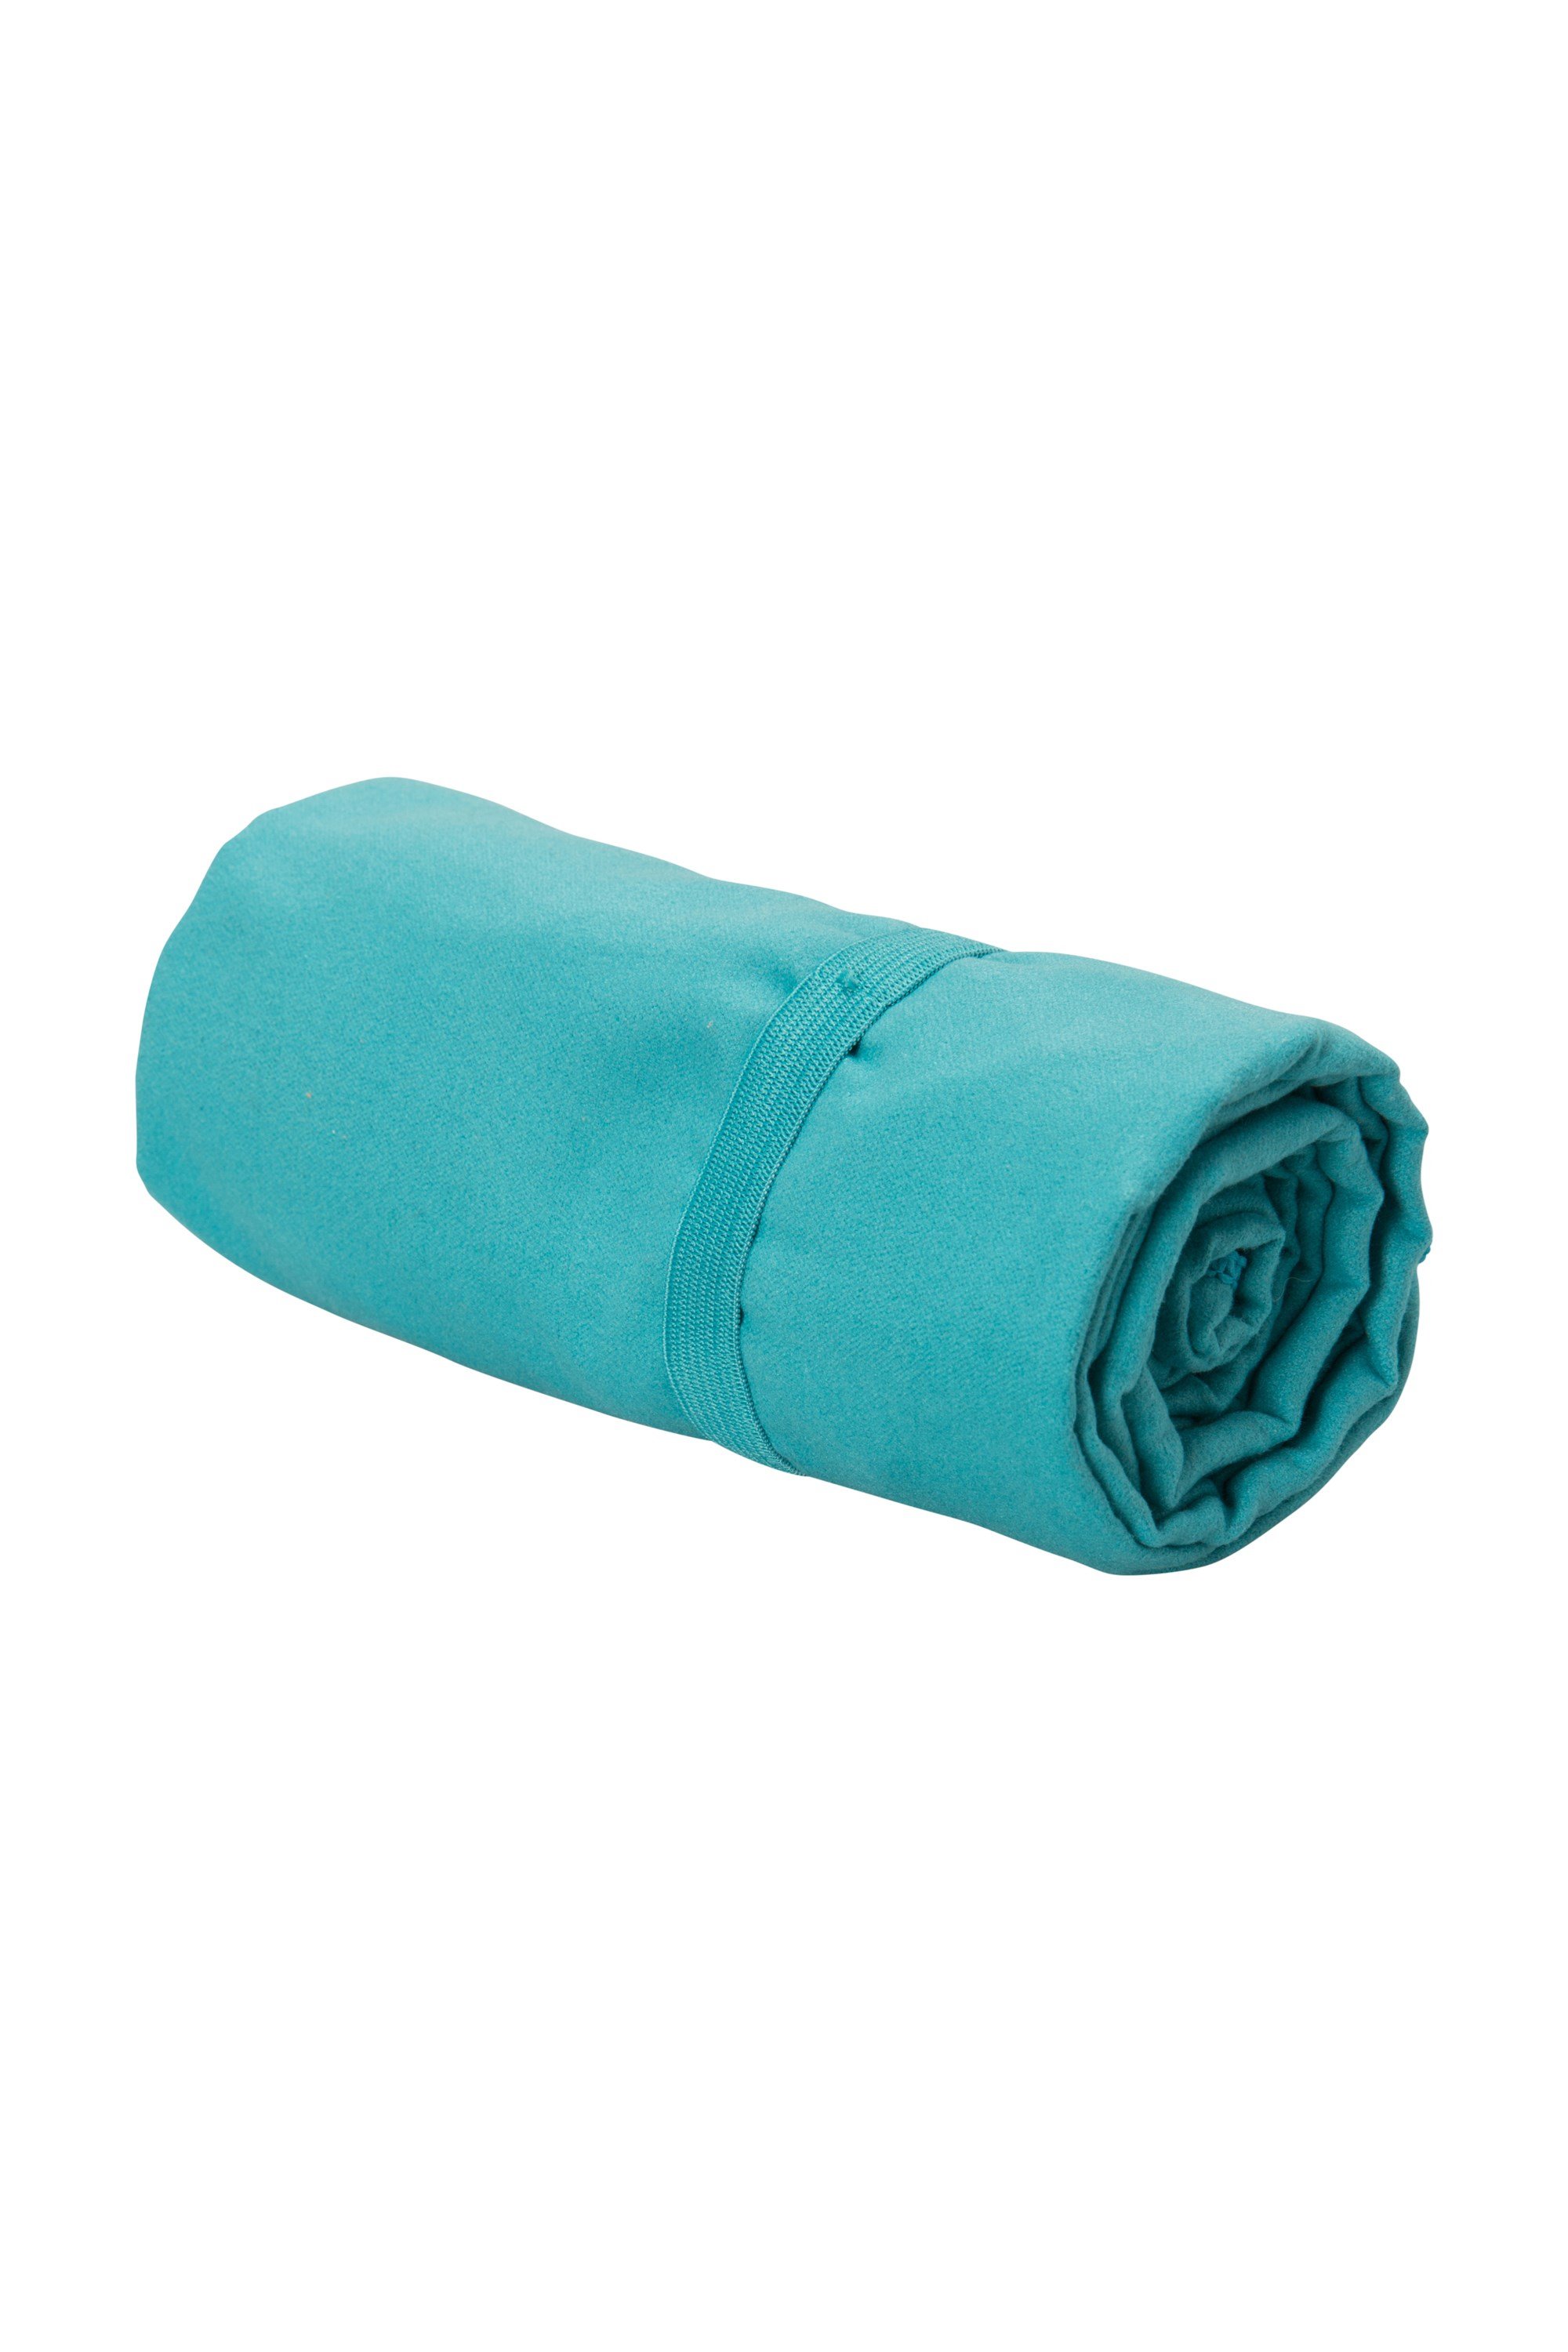 Compact Travel Towel - 120 X 58cm - Teal